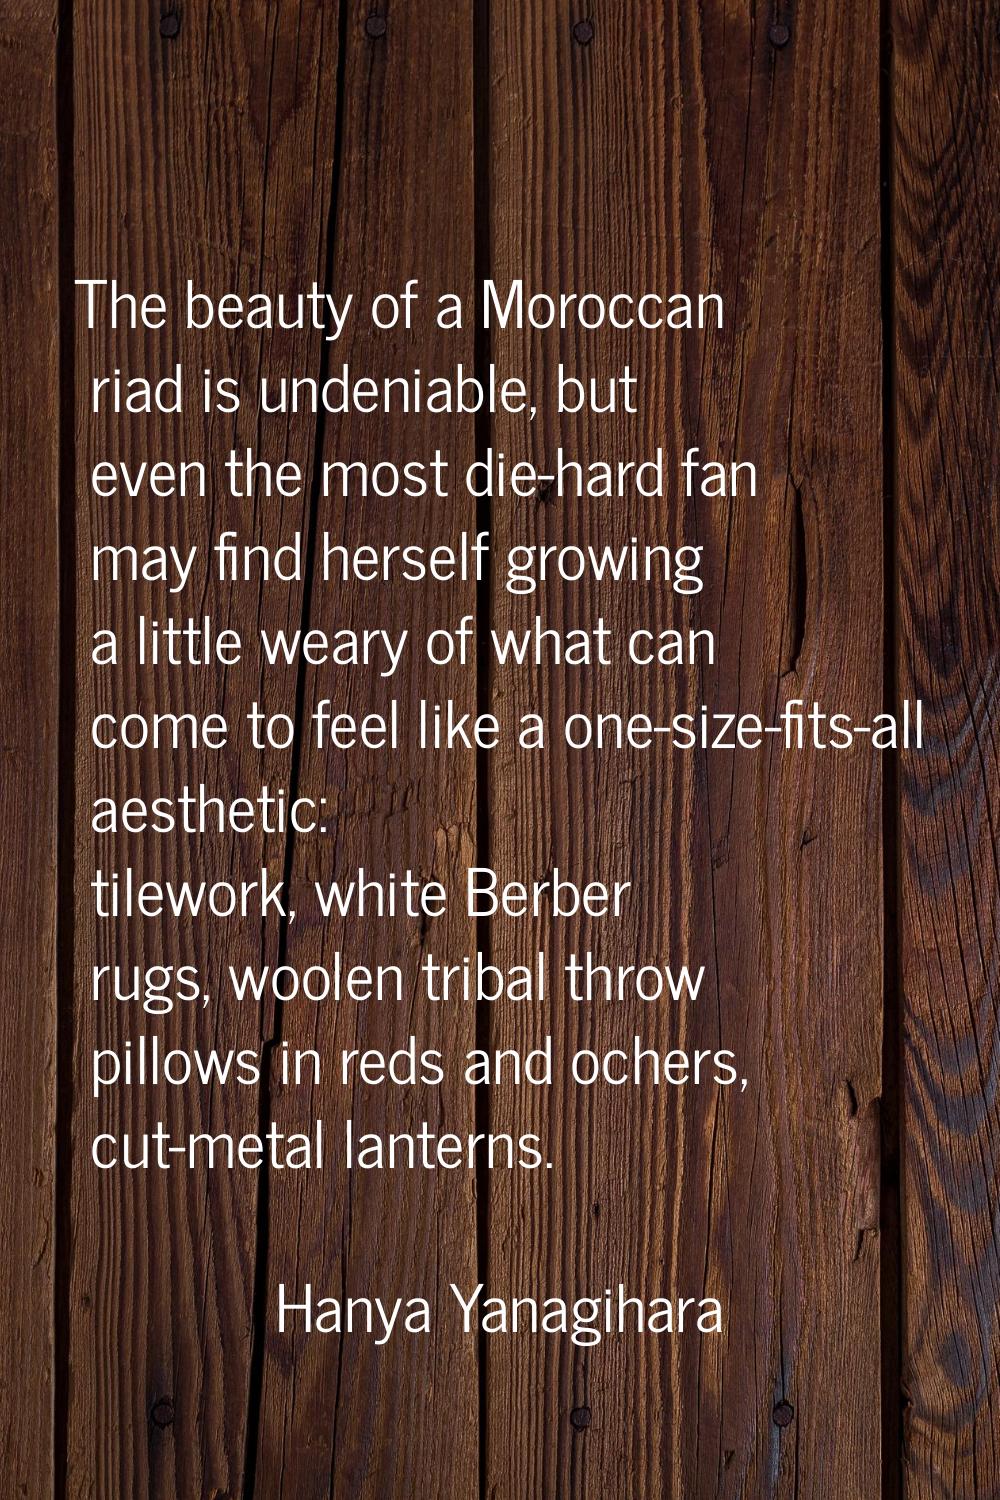 The beauty of a Moroccan riad is undeniable, but even the most die-hard fan may find herself growin